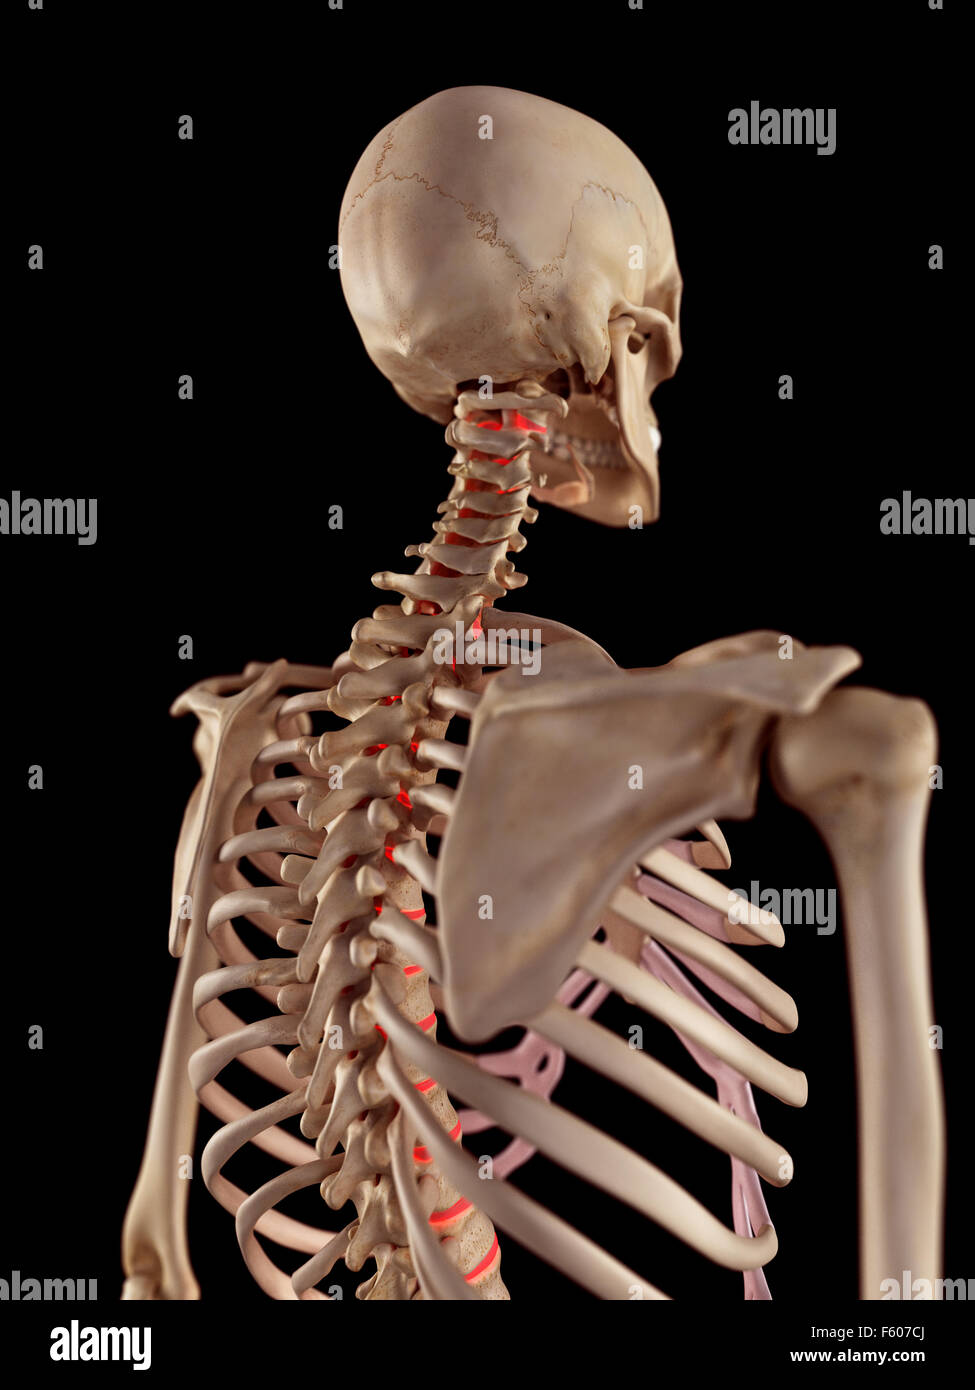 medical accurate illustration of the intervertebral discs Stock Photo